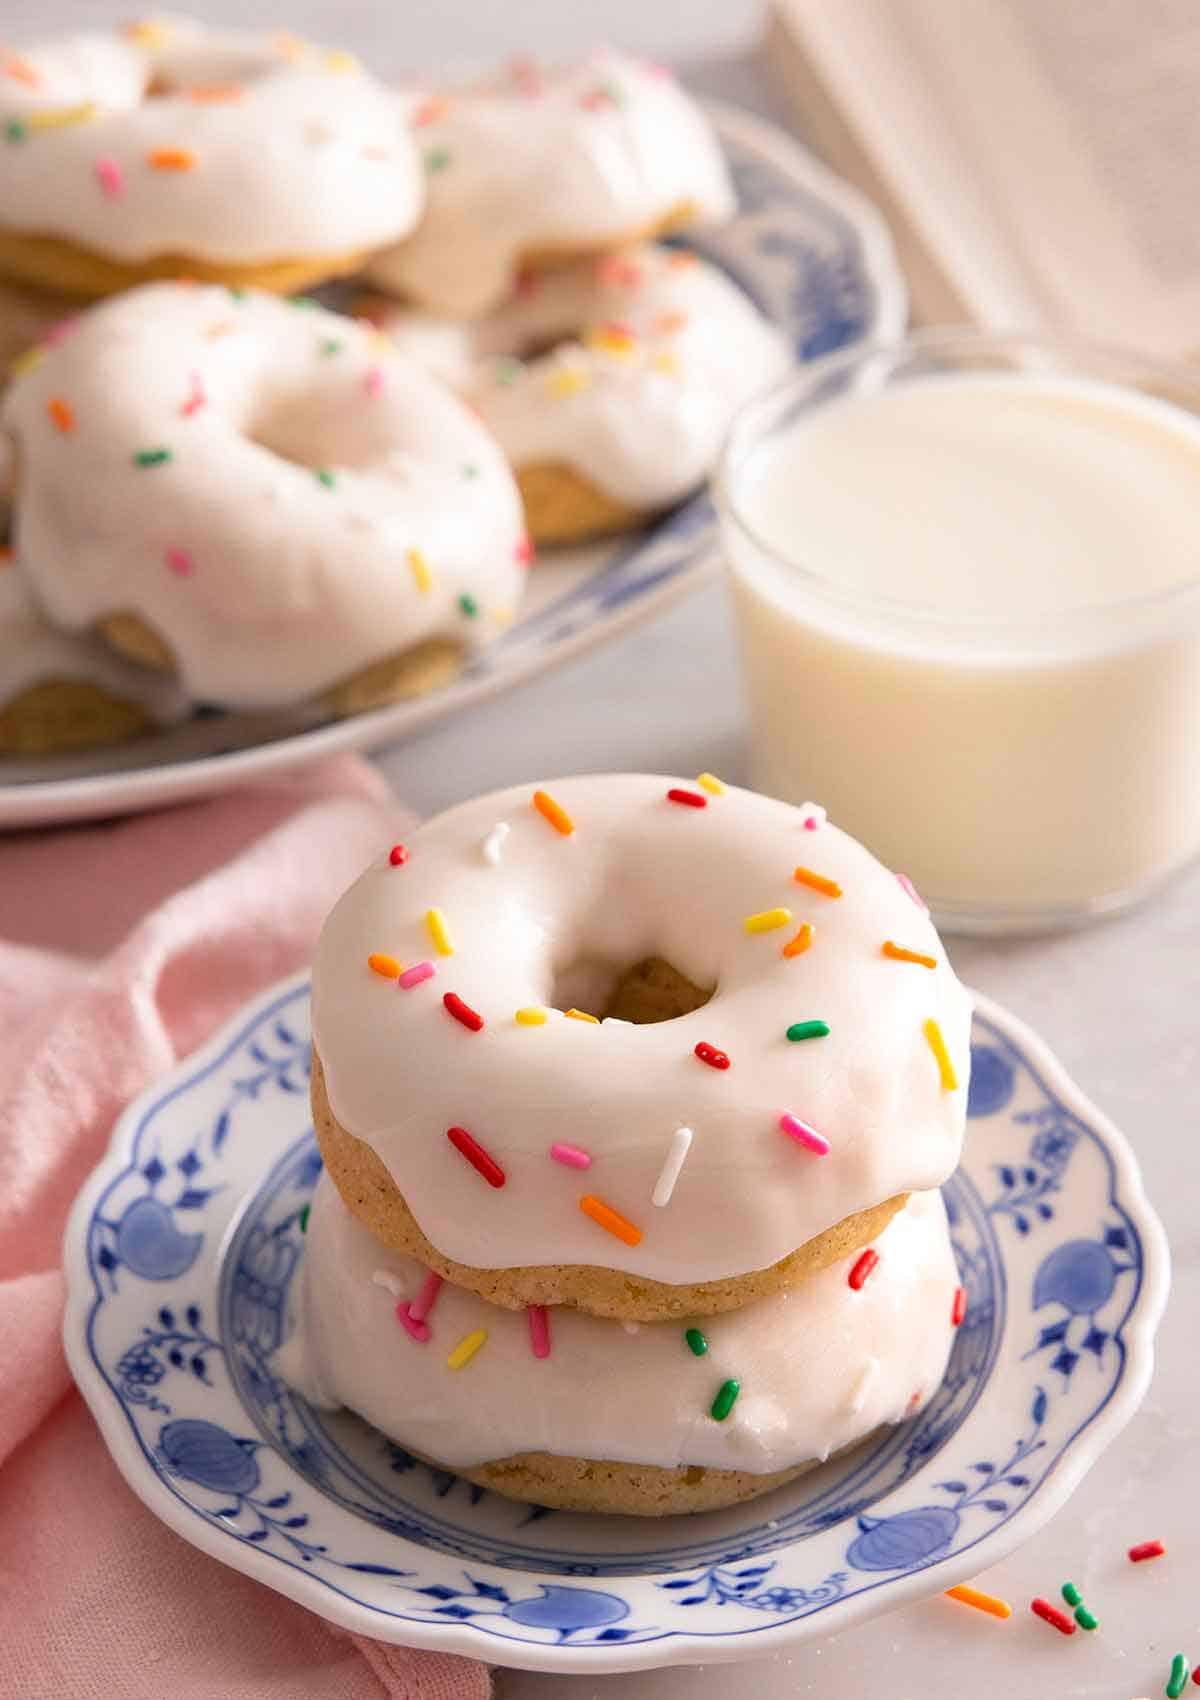 A plate with two stacked baked donuts with glaze and sprinkles on top.